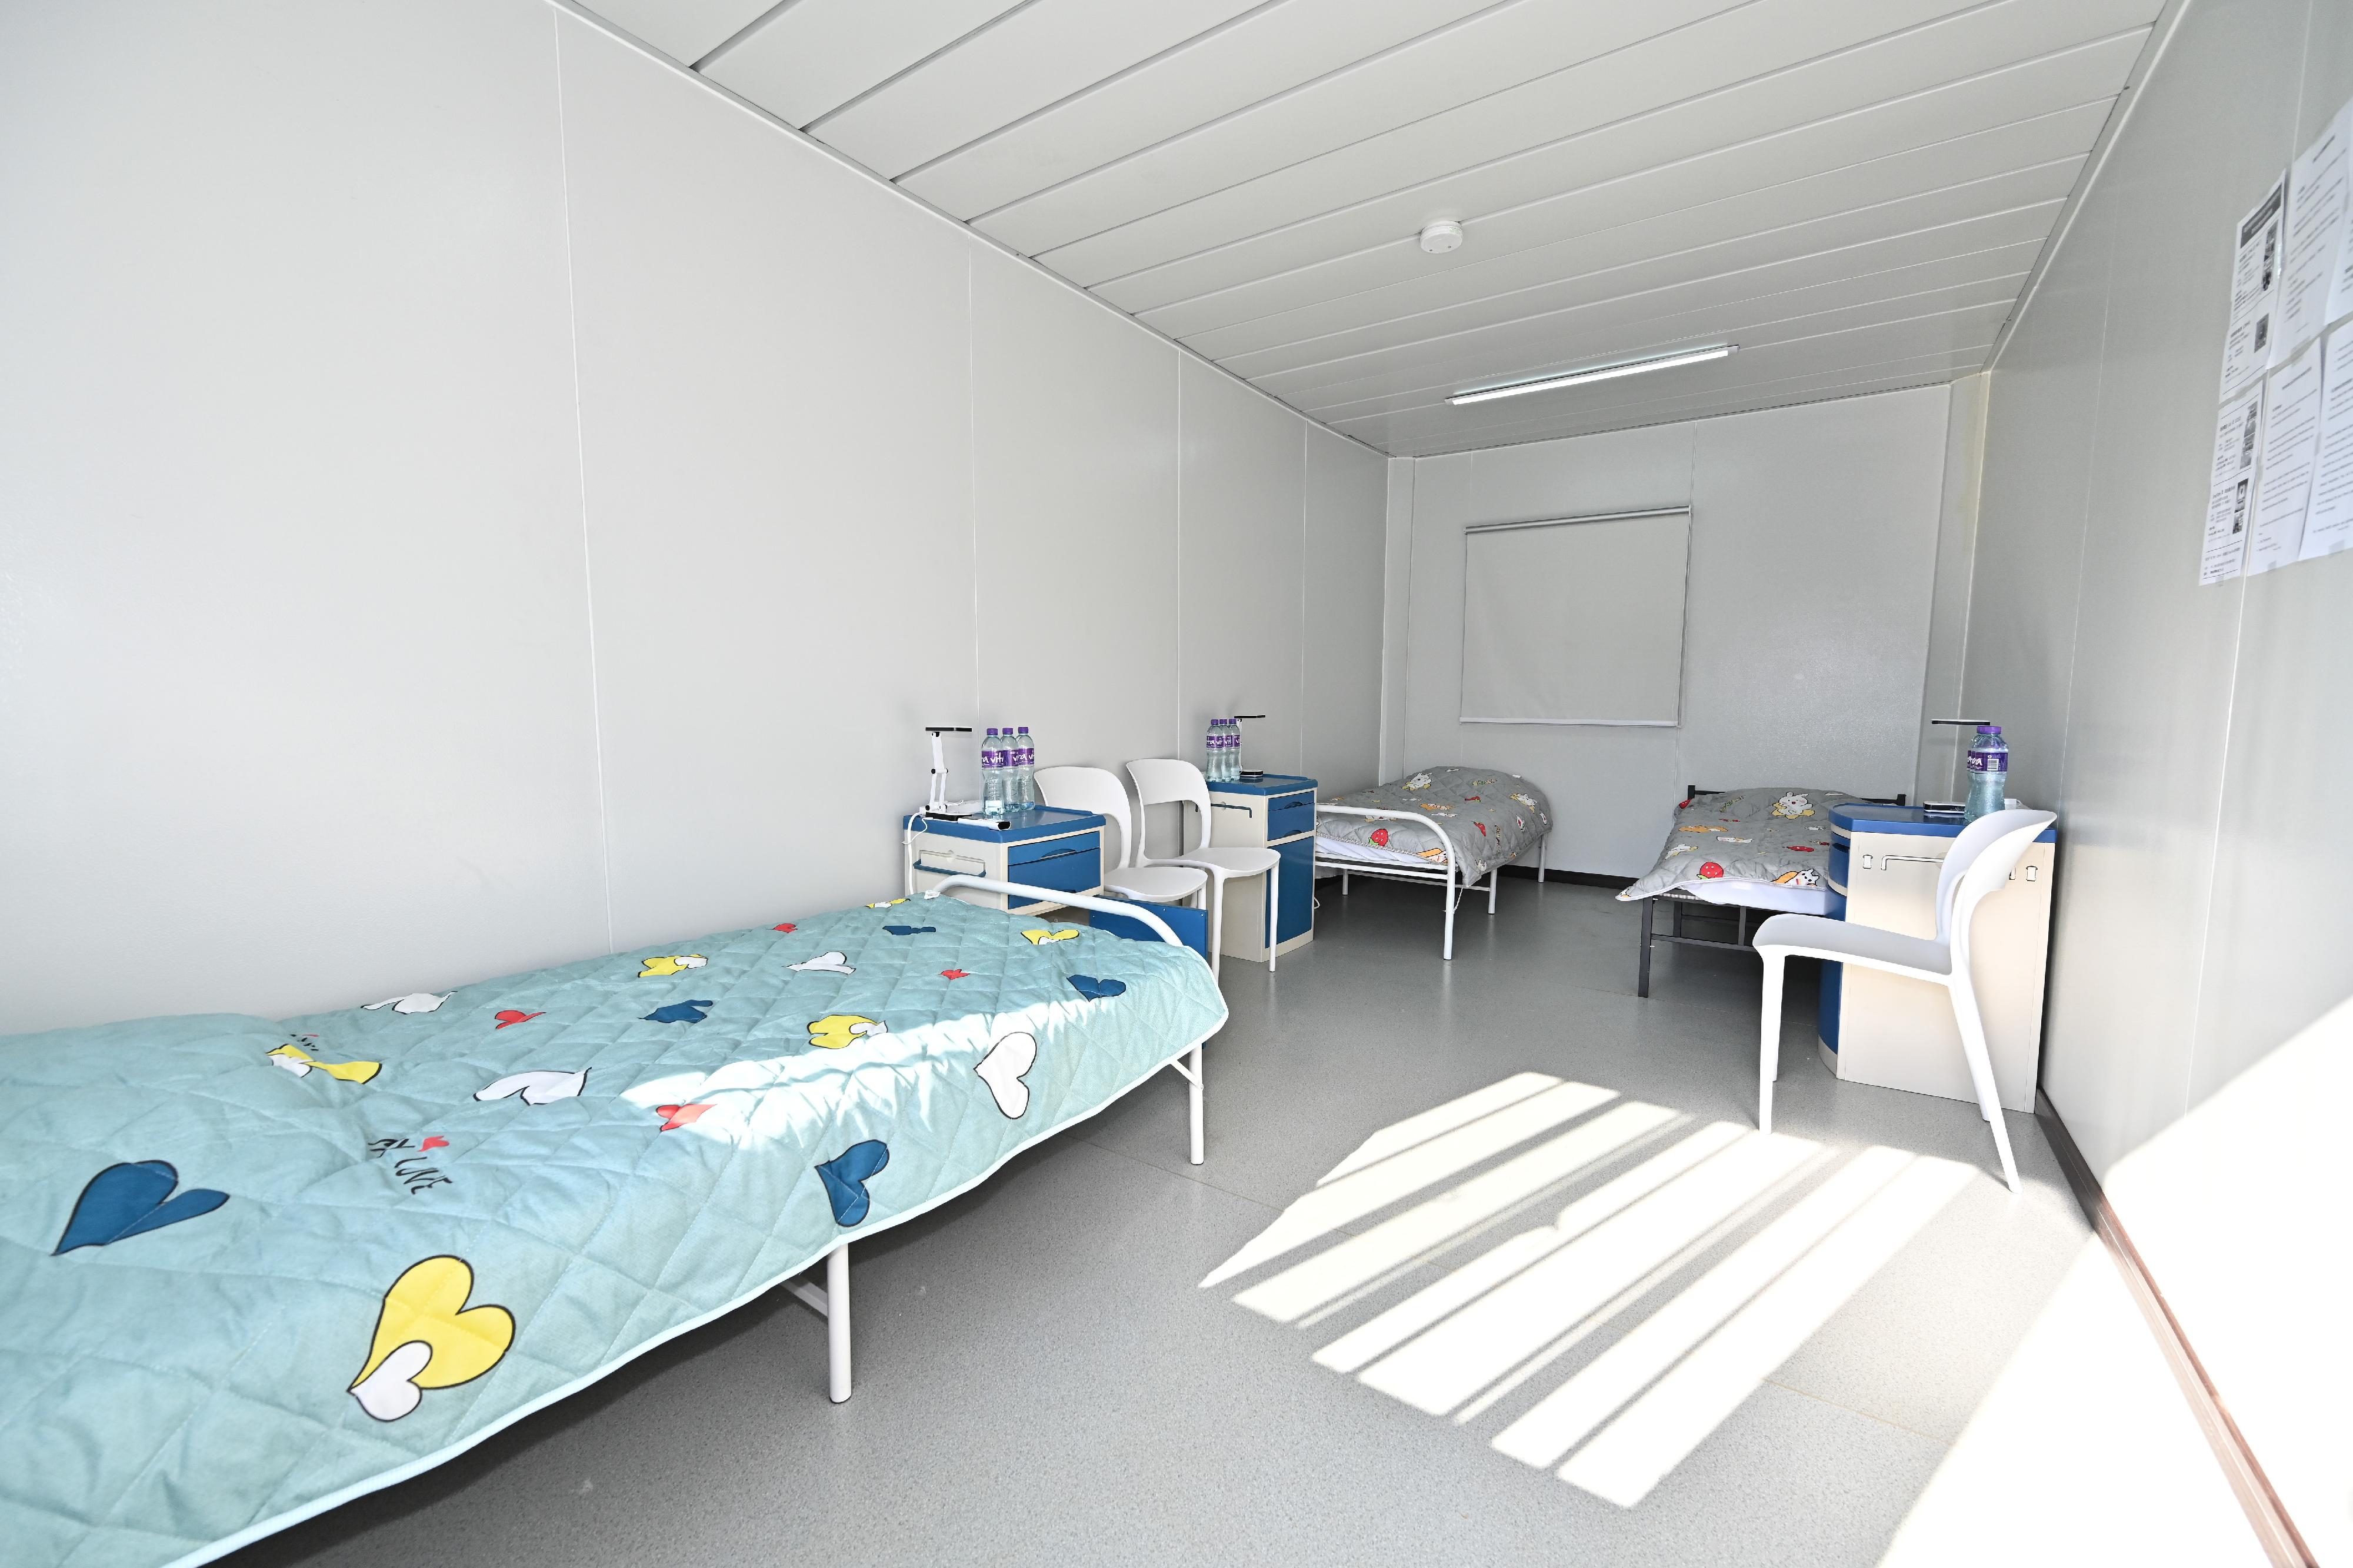 The Chief Secretary for Administration, Mr John Lee, this morning (March 12) visited the third community isolation facility constructed with Mainland support on the Hong Kong Boundary Crossing Facilities Island of the Hong Kong-Zhuhai-Macao Bridge (HZMB). Photo shows a room at the community isolation facility on the Hong Kong Boundary Crossing Facilities Island of the HZMB.